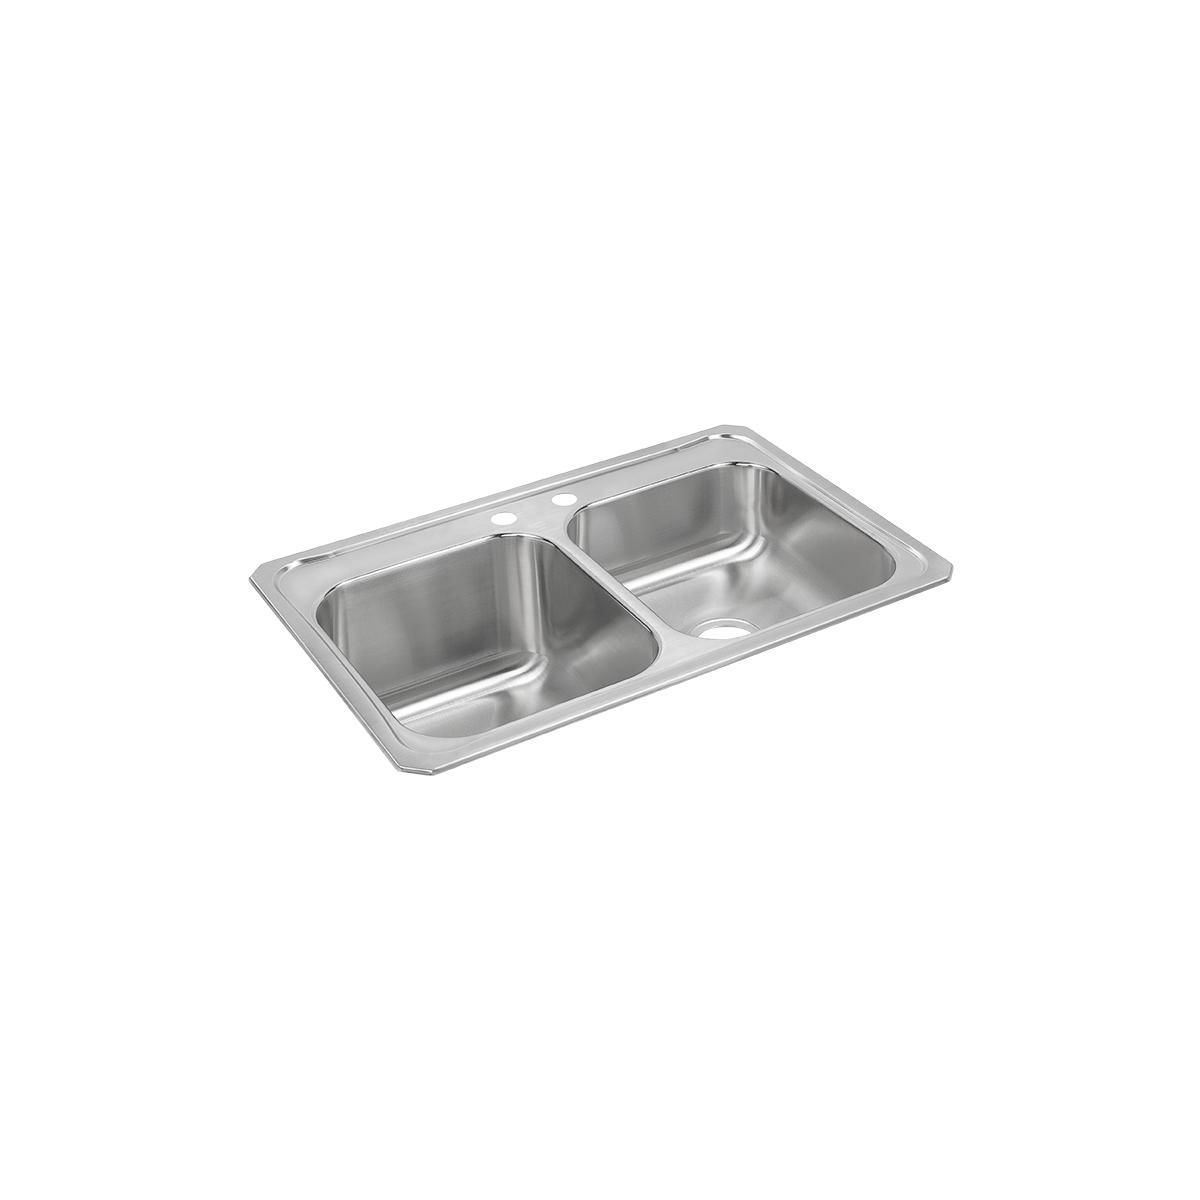 Elkay Celebrity 33" x 22" x 10-1/4" Equal Double Bowl Drop-in Sink with Right Small Bowl